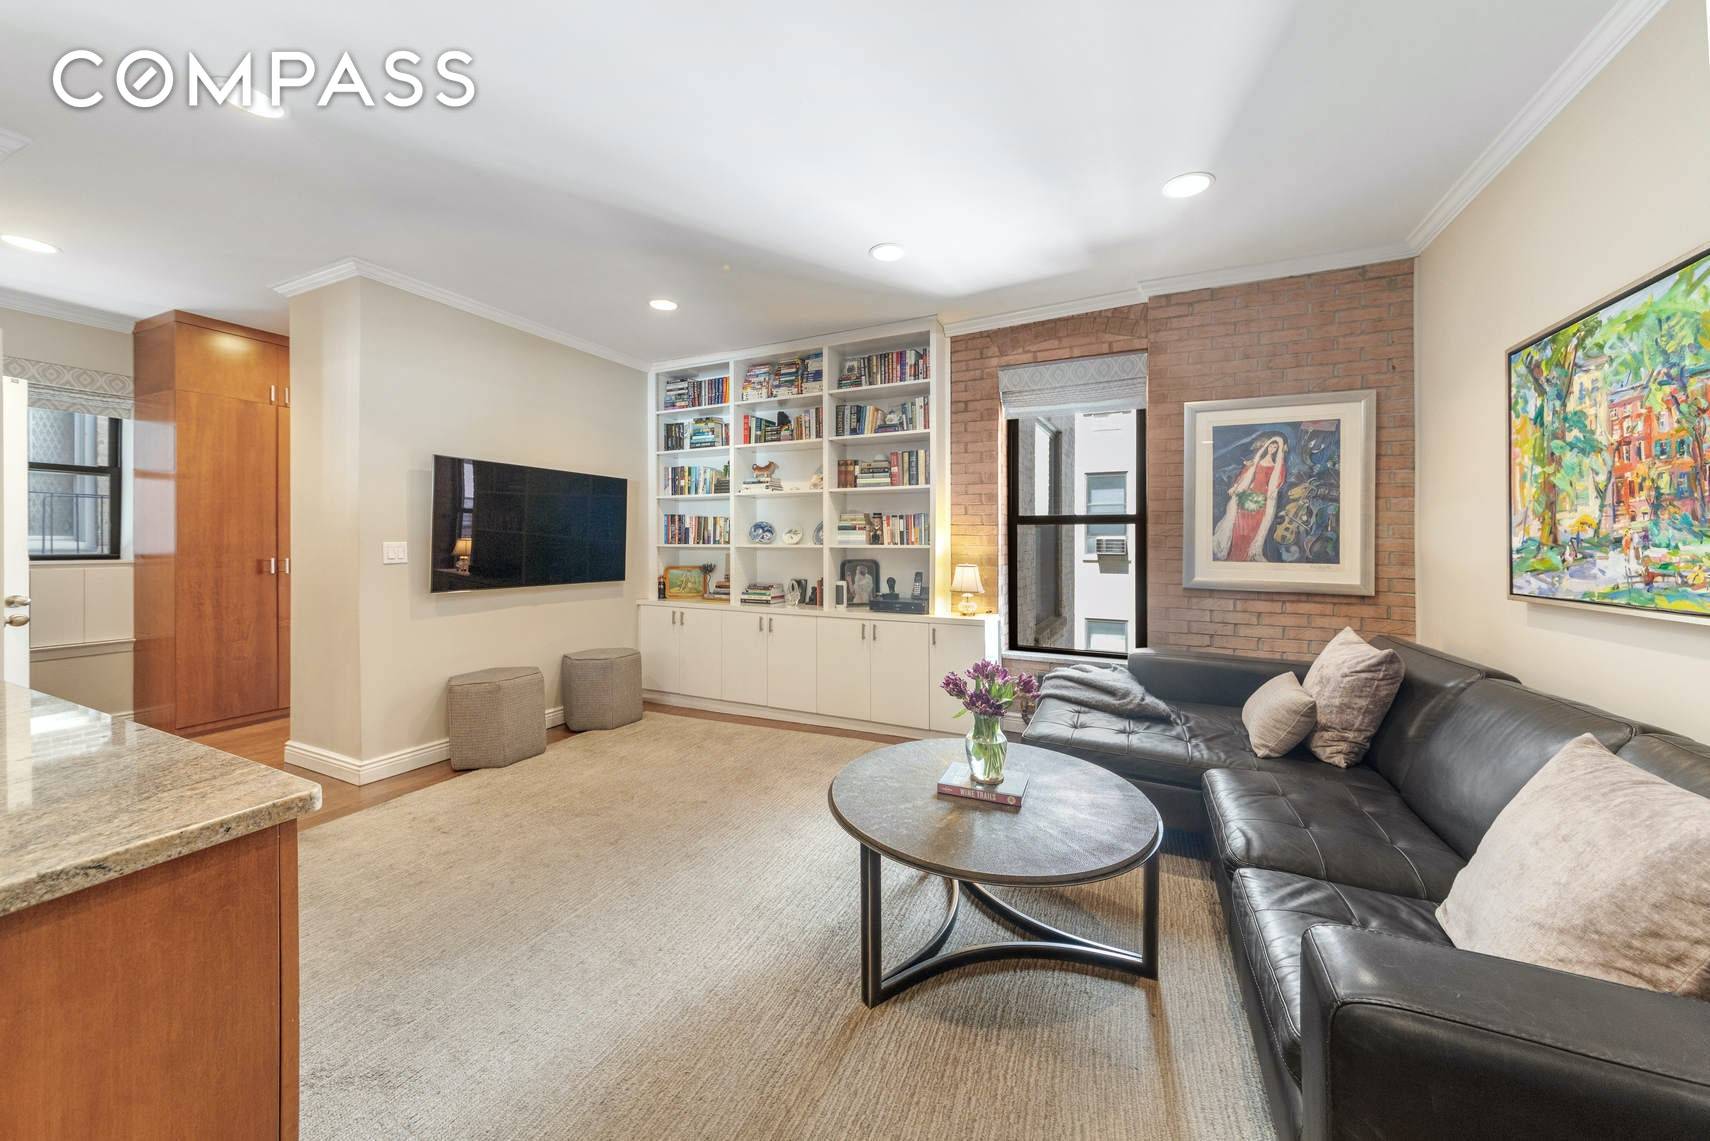 A 1 Bedroom home in a pre war, Greenwich Village doorman building for less than 1 Million !